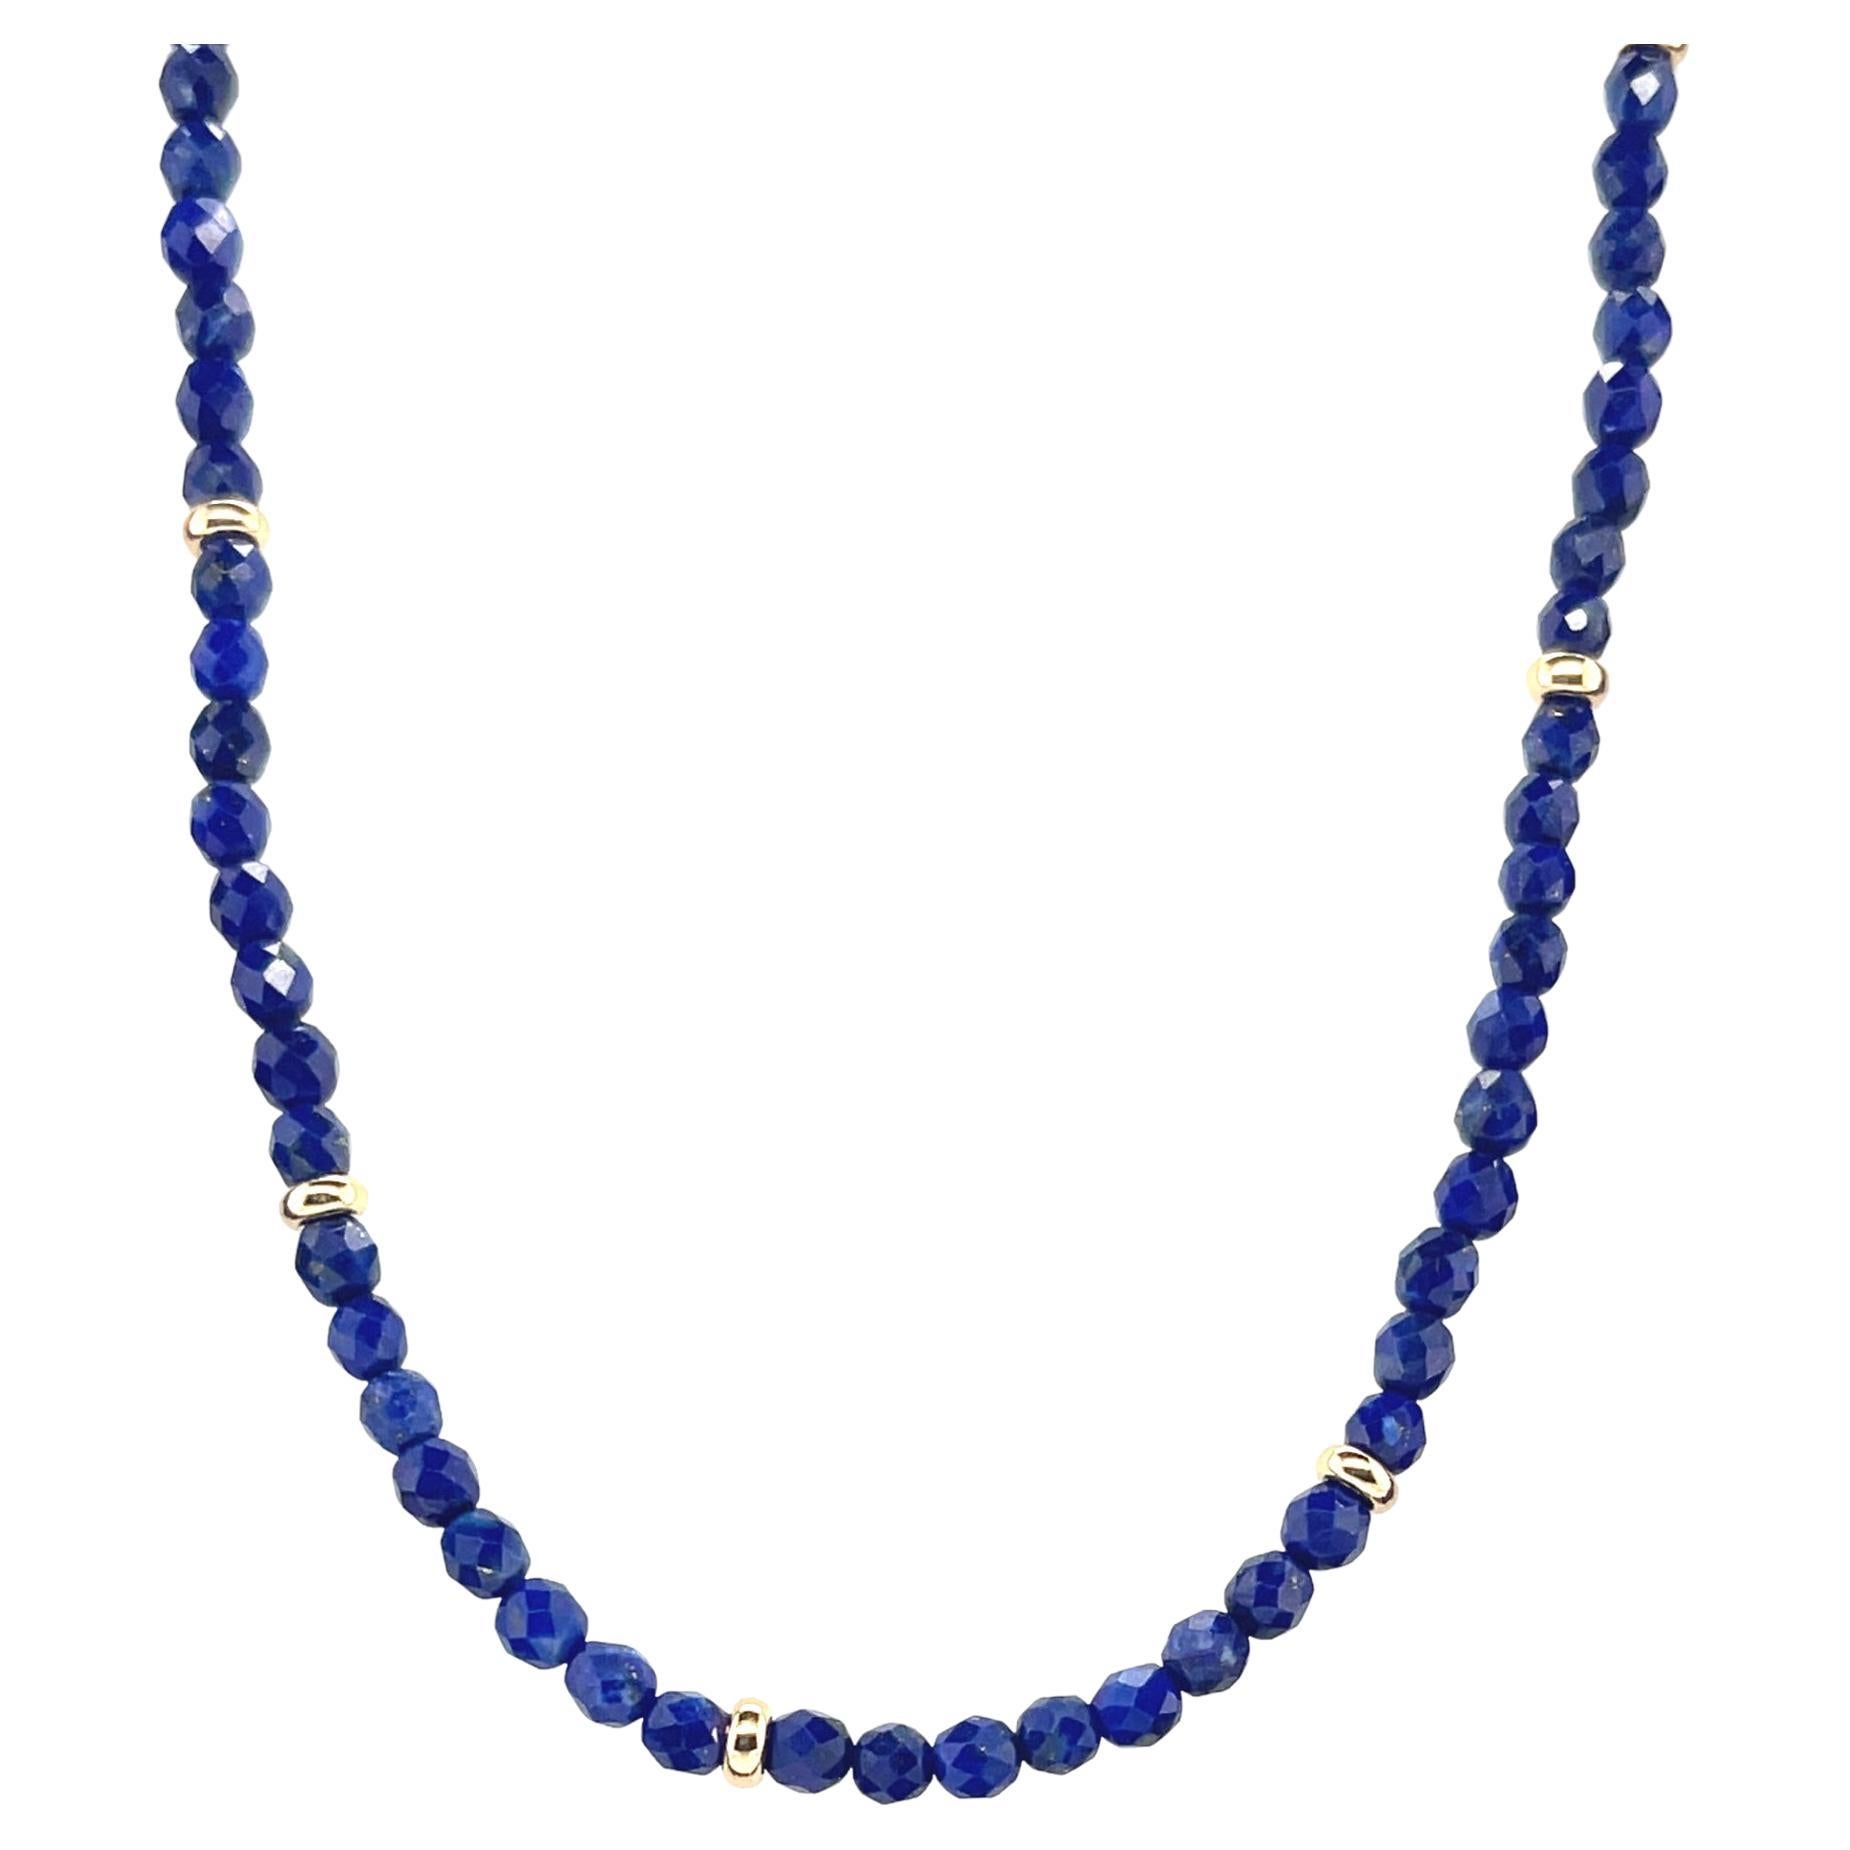 Faceted Lapis Bead Necklace with Yellow Gold Accents, 32 Inches